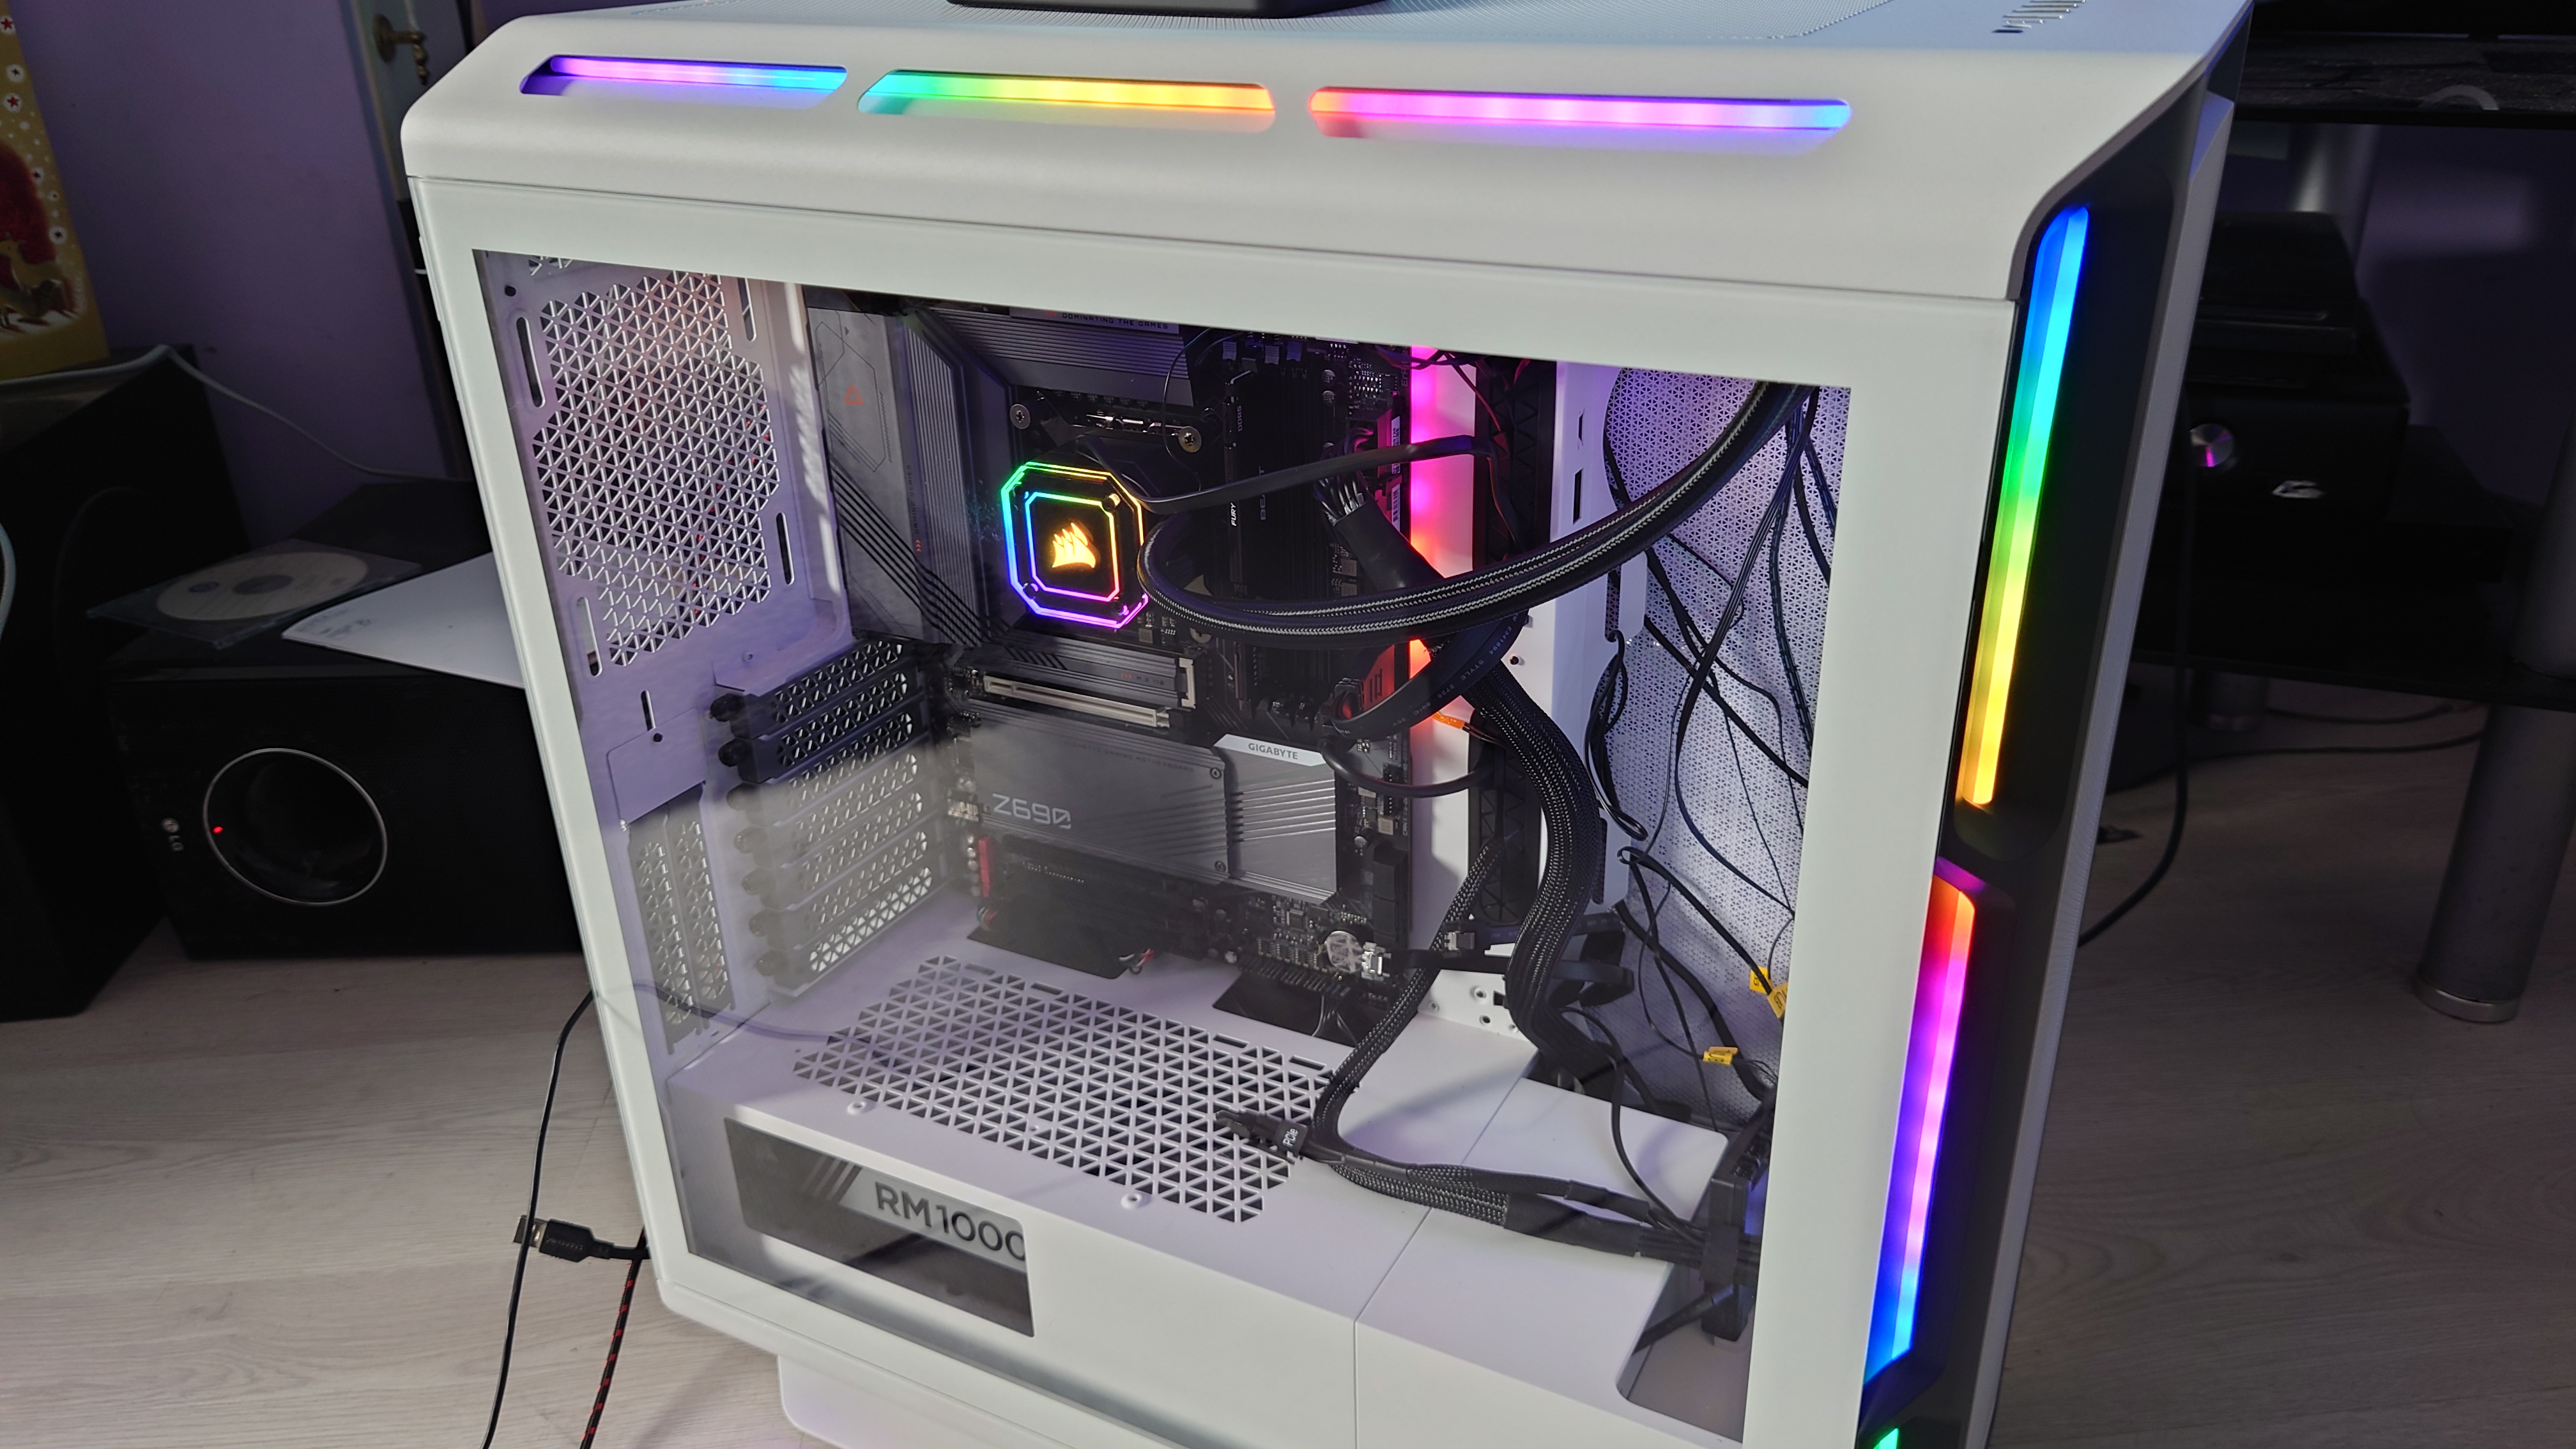 How to Pick the BEST Parts for Your Gaming PC Build! [+ How to